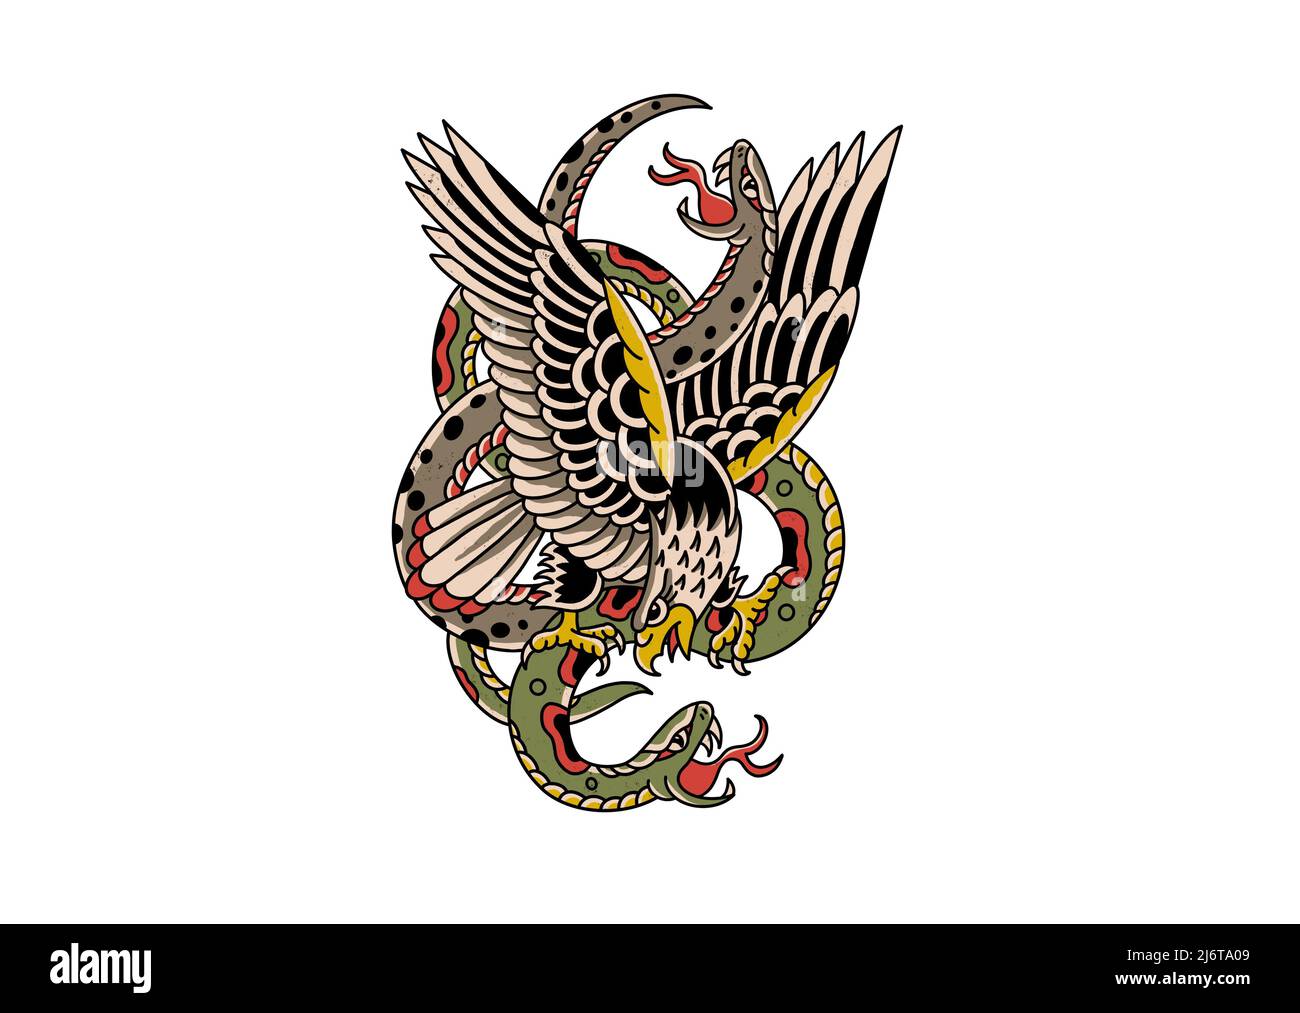 Old school tattoo inspired graphic design eagle and snakes Stock Photo